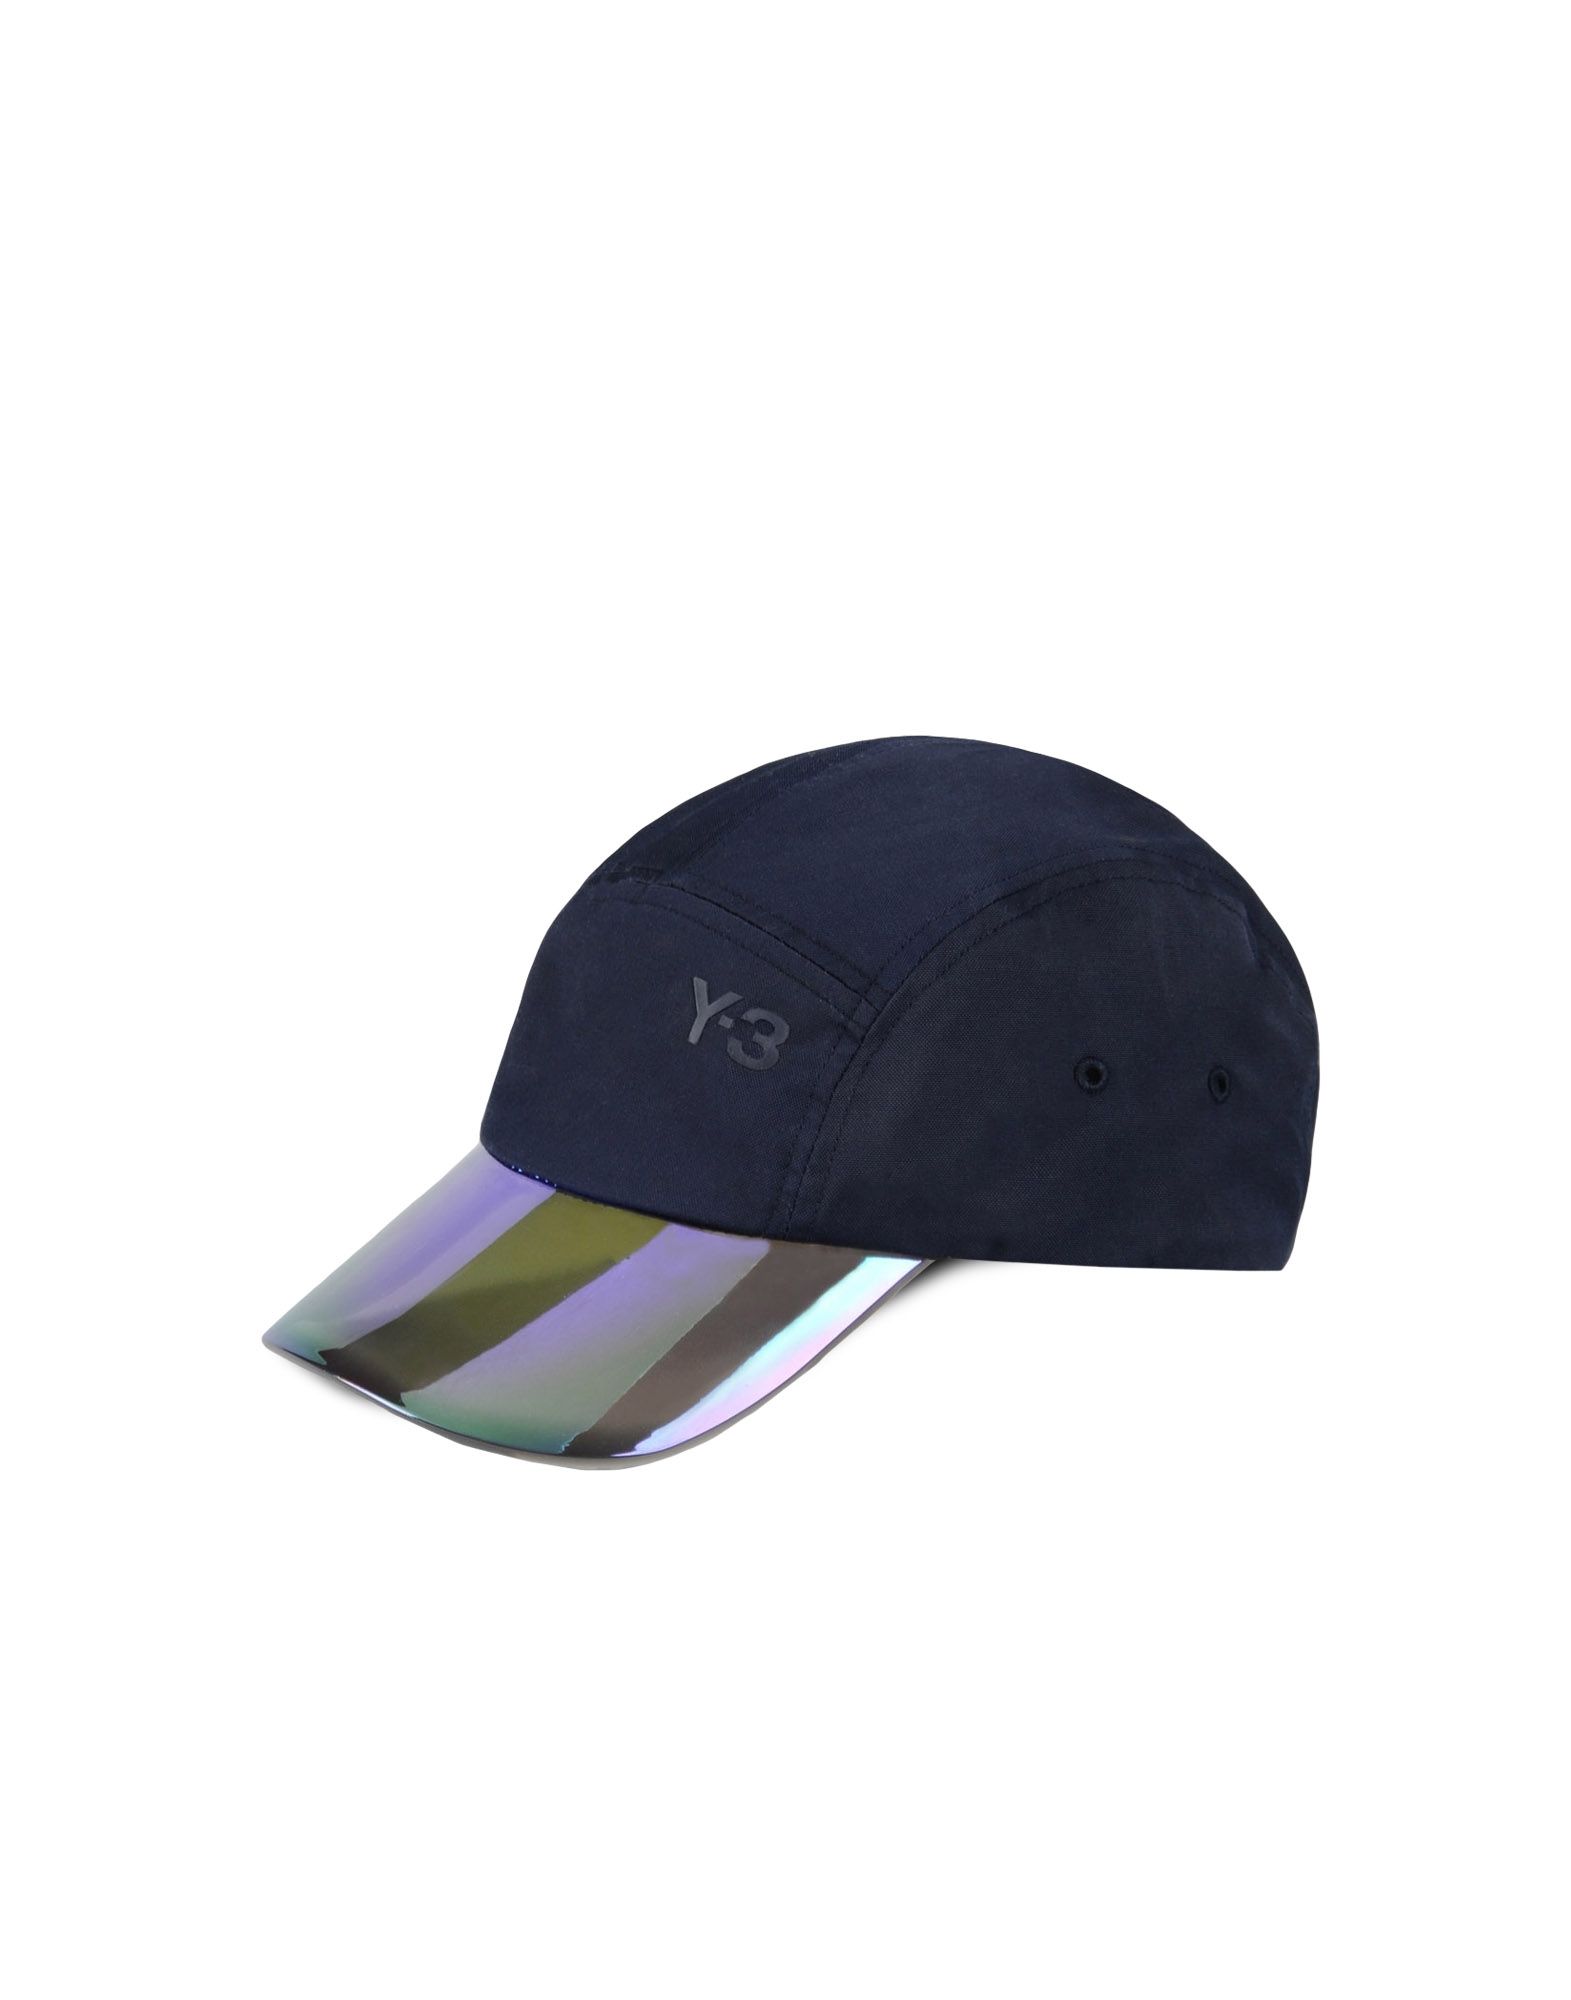 Y 3 CAMPER TPU CAP for Women | Adidas Y-3 Official Store